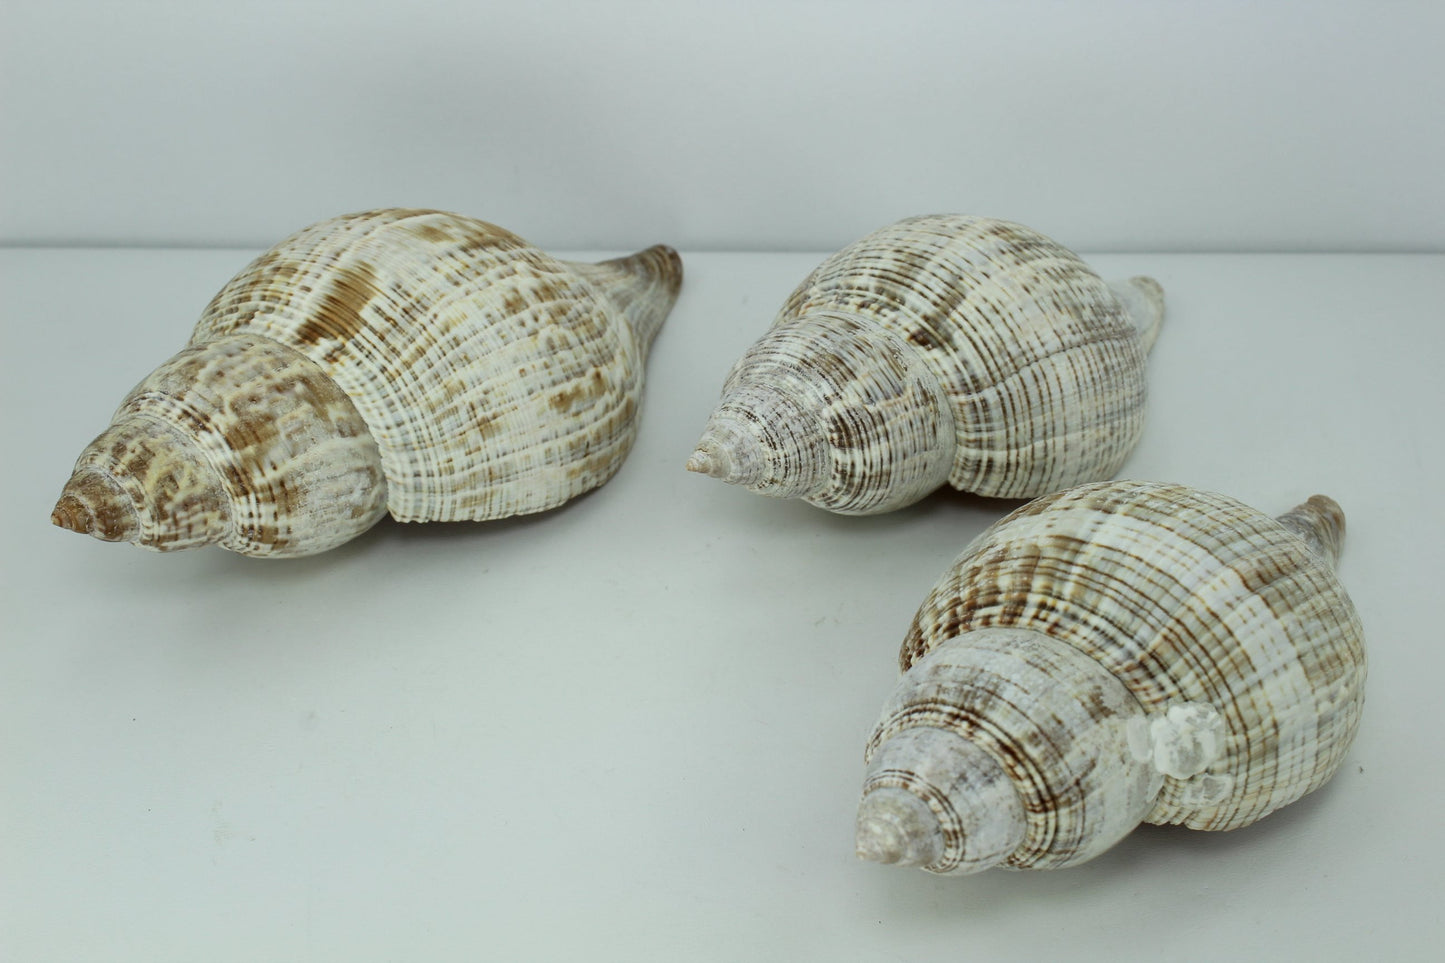 Florida Natural Shells 3 Large 5" Tulips Estate Collection Crafts Shell Art Collectibles big